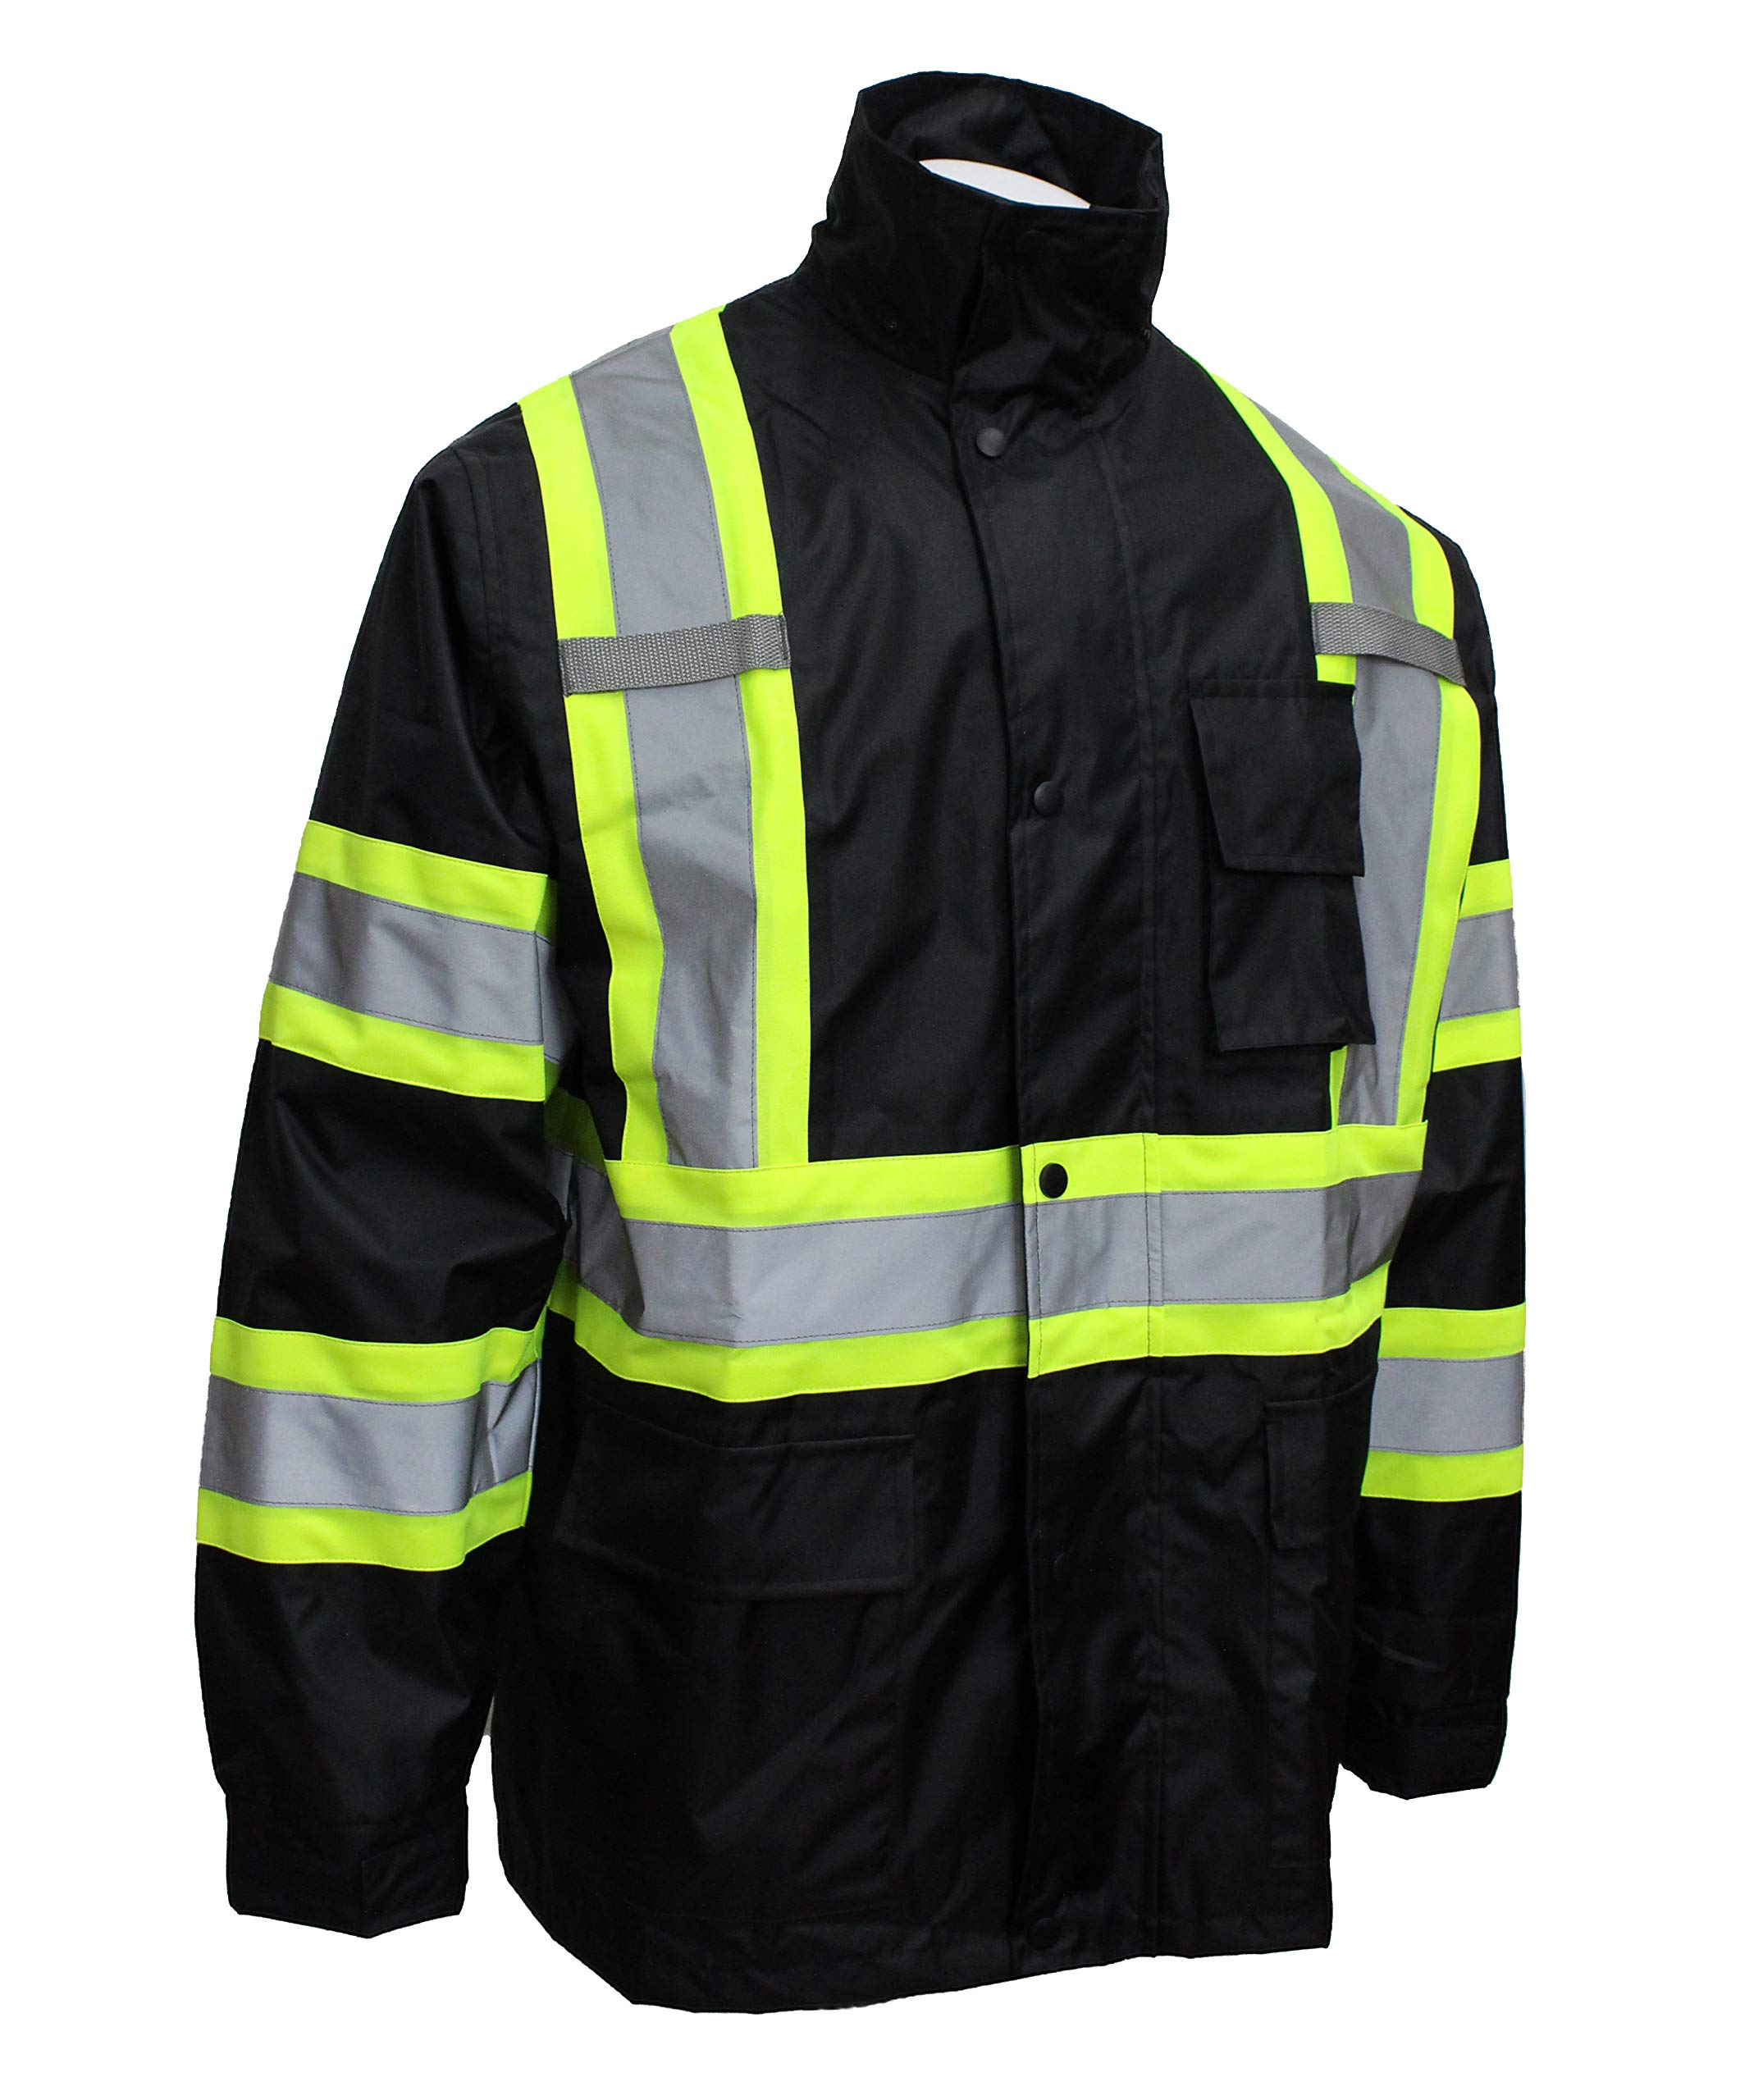 RK Safety TBK66 Class 3 Rain suit, Jacket, Pants High Visibility Reflective Black Bottom with X Pattern (Extra Large, Black)